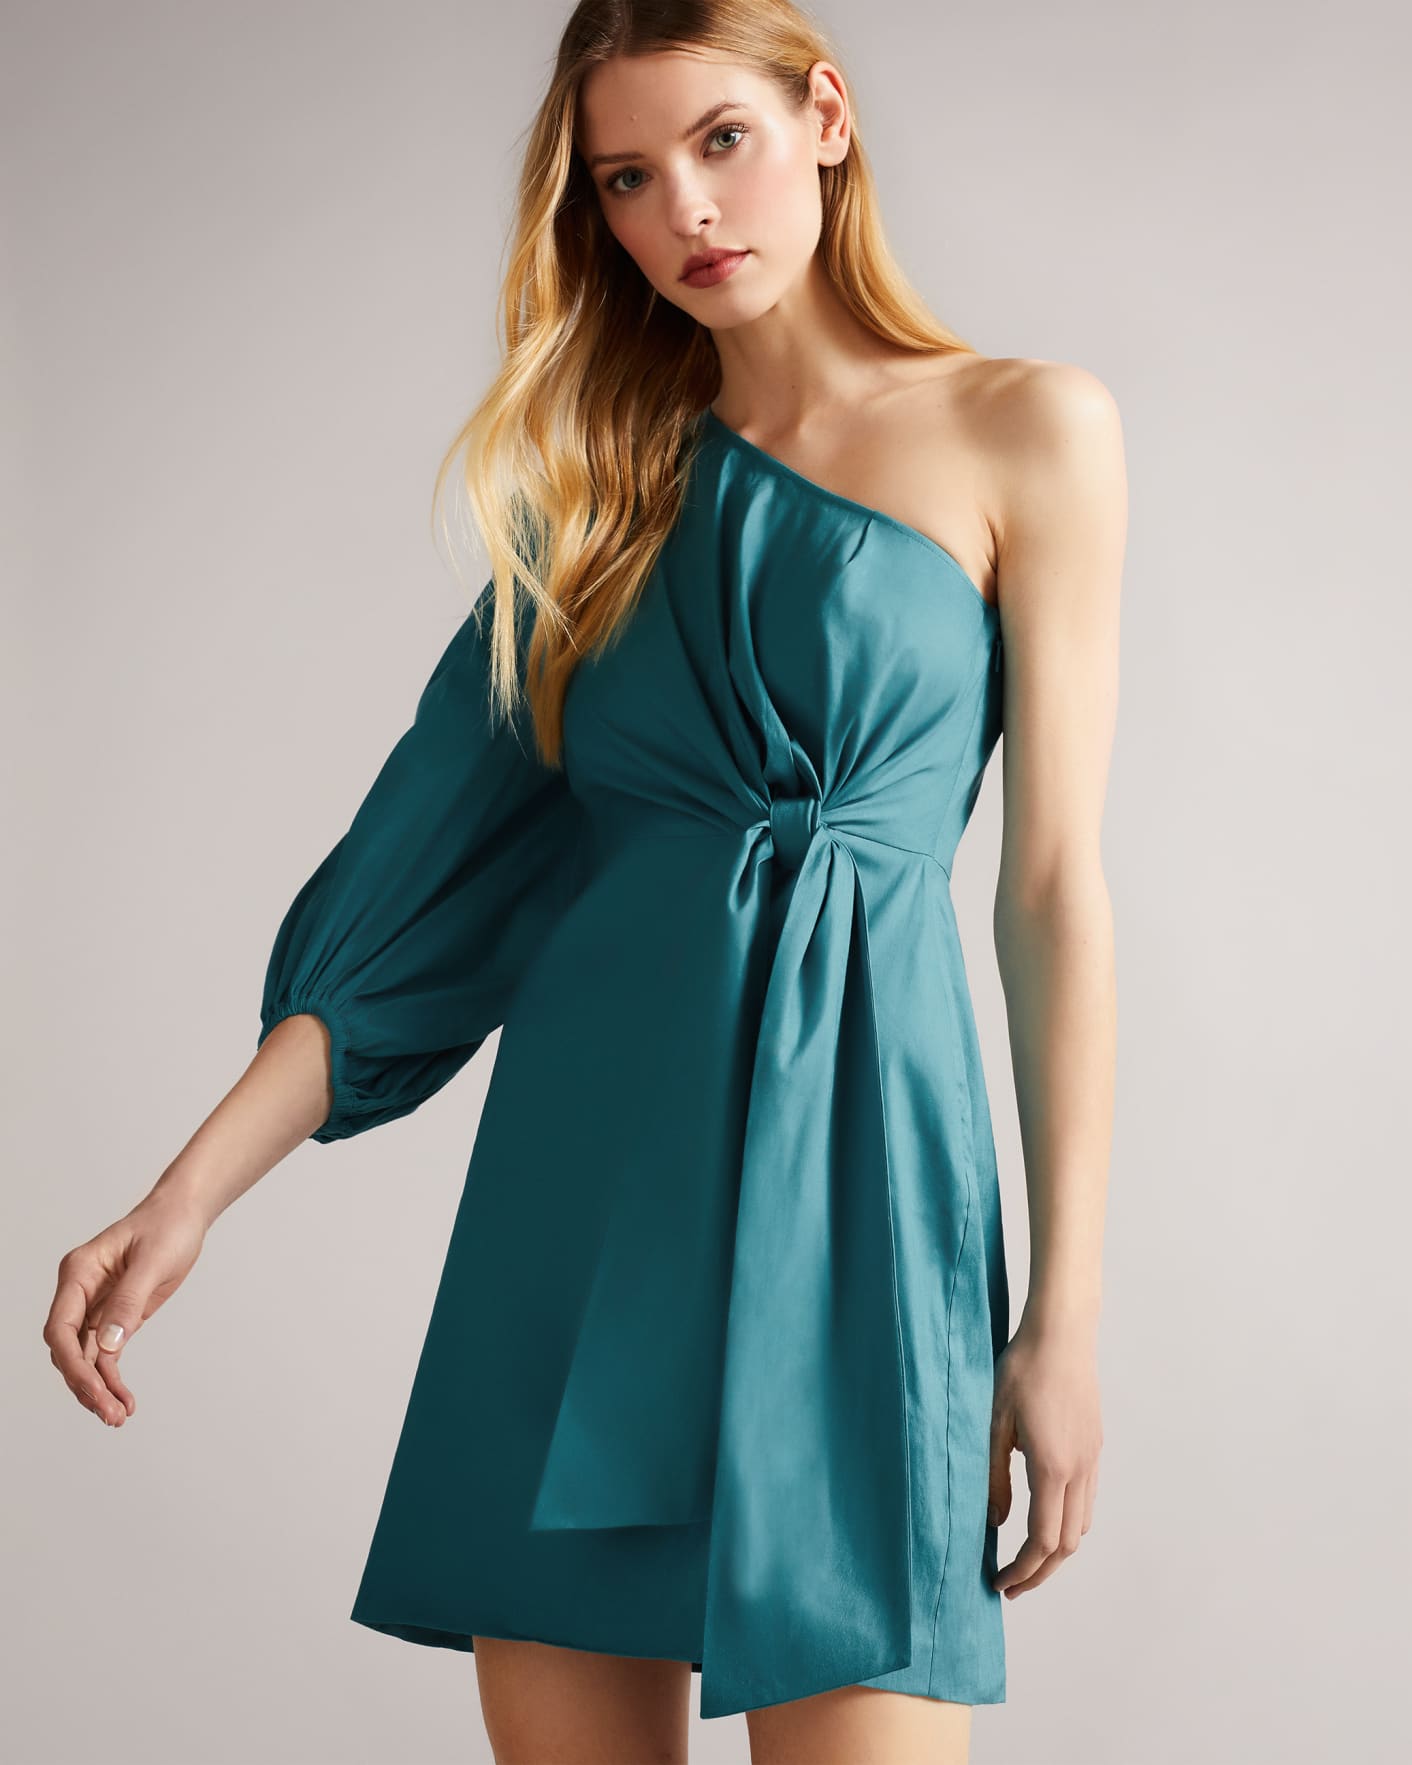 Turquoise One Shoulder Mini Dress With Tie Waist Ted Baker